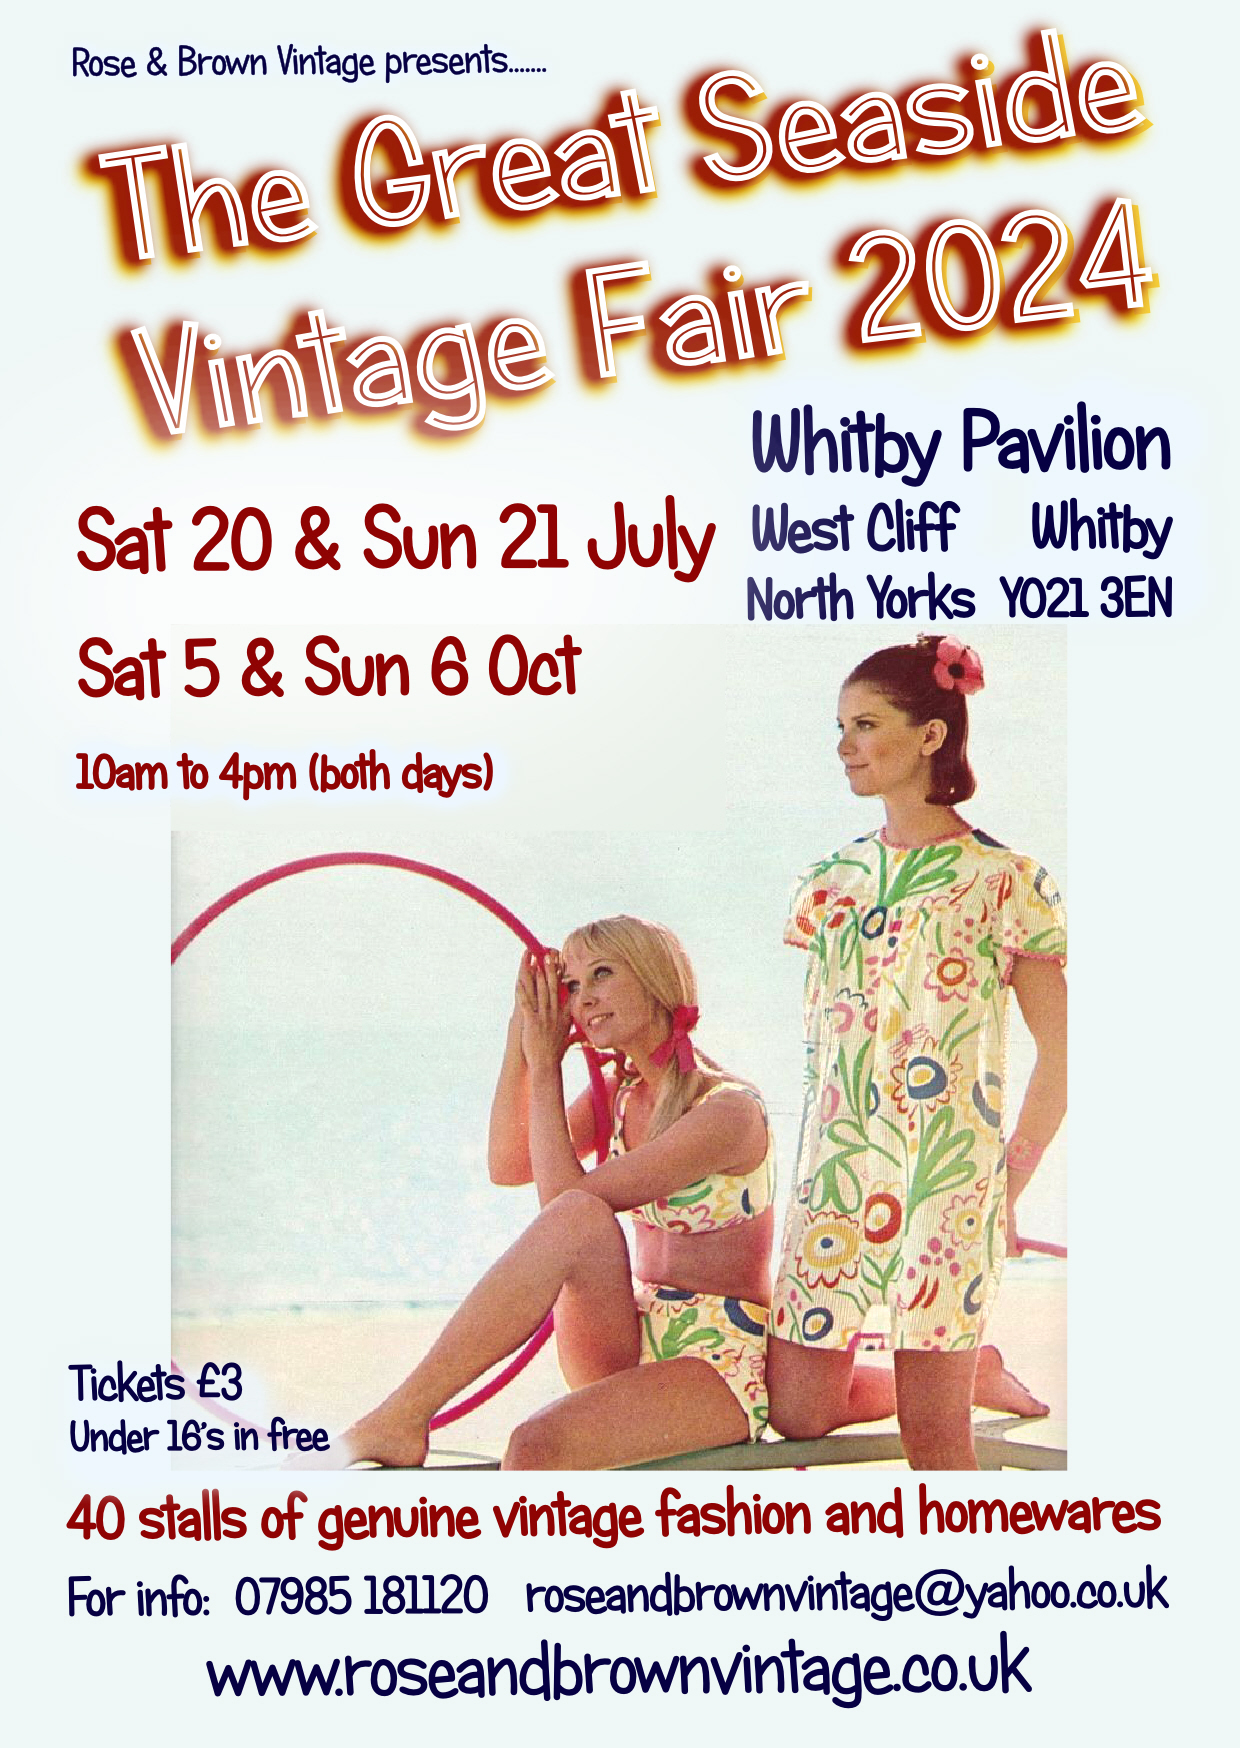 click here to view our Advance tickets for The Great Seaside Vintage Fair section